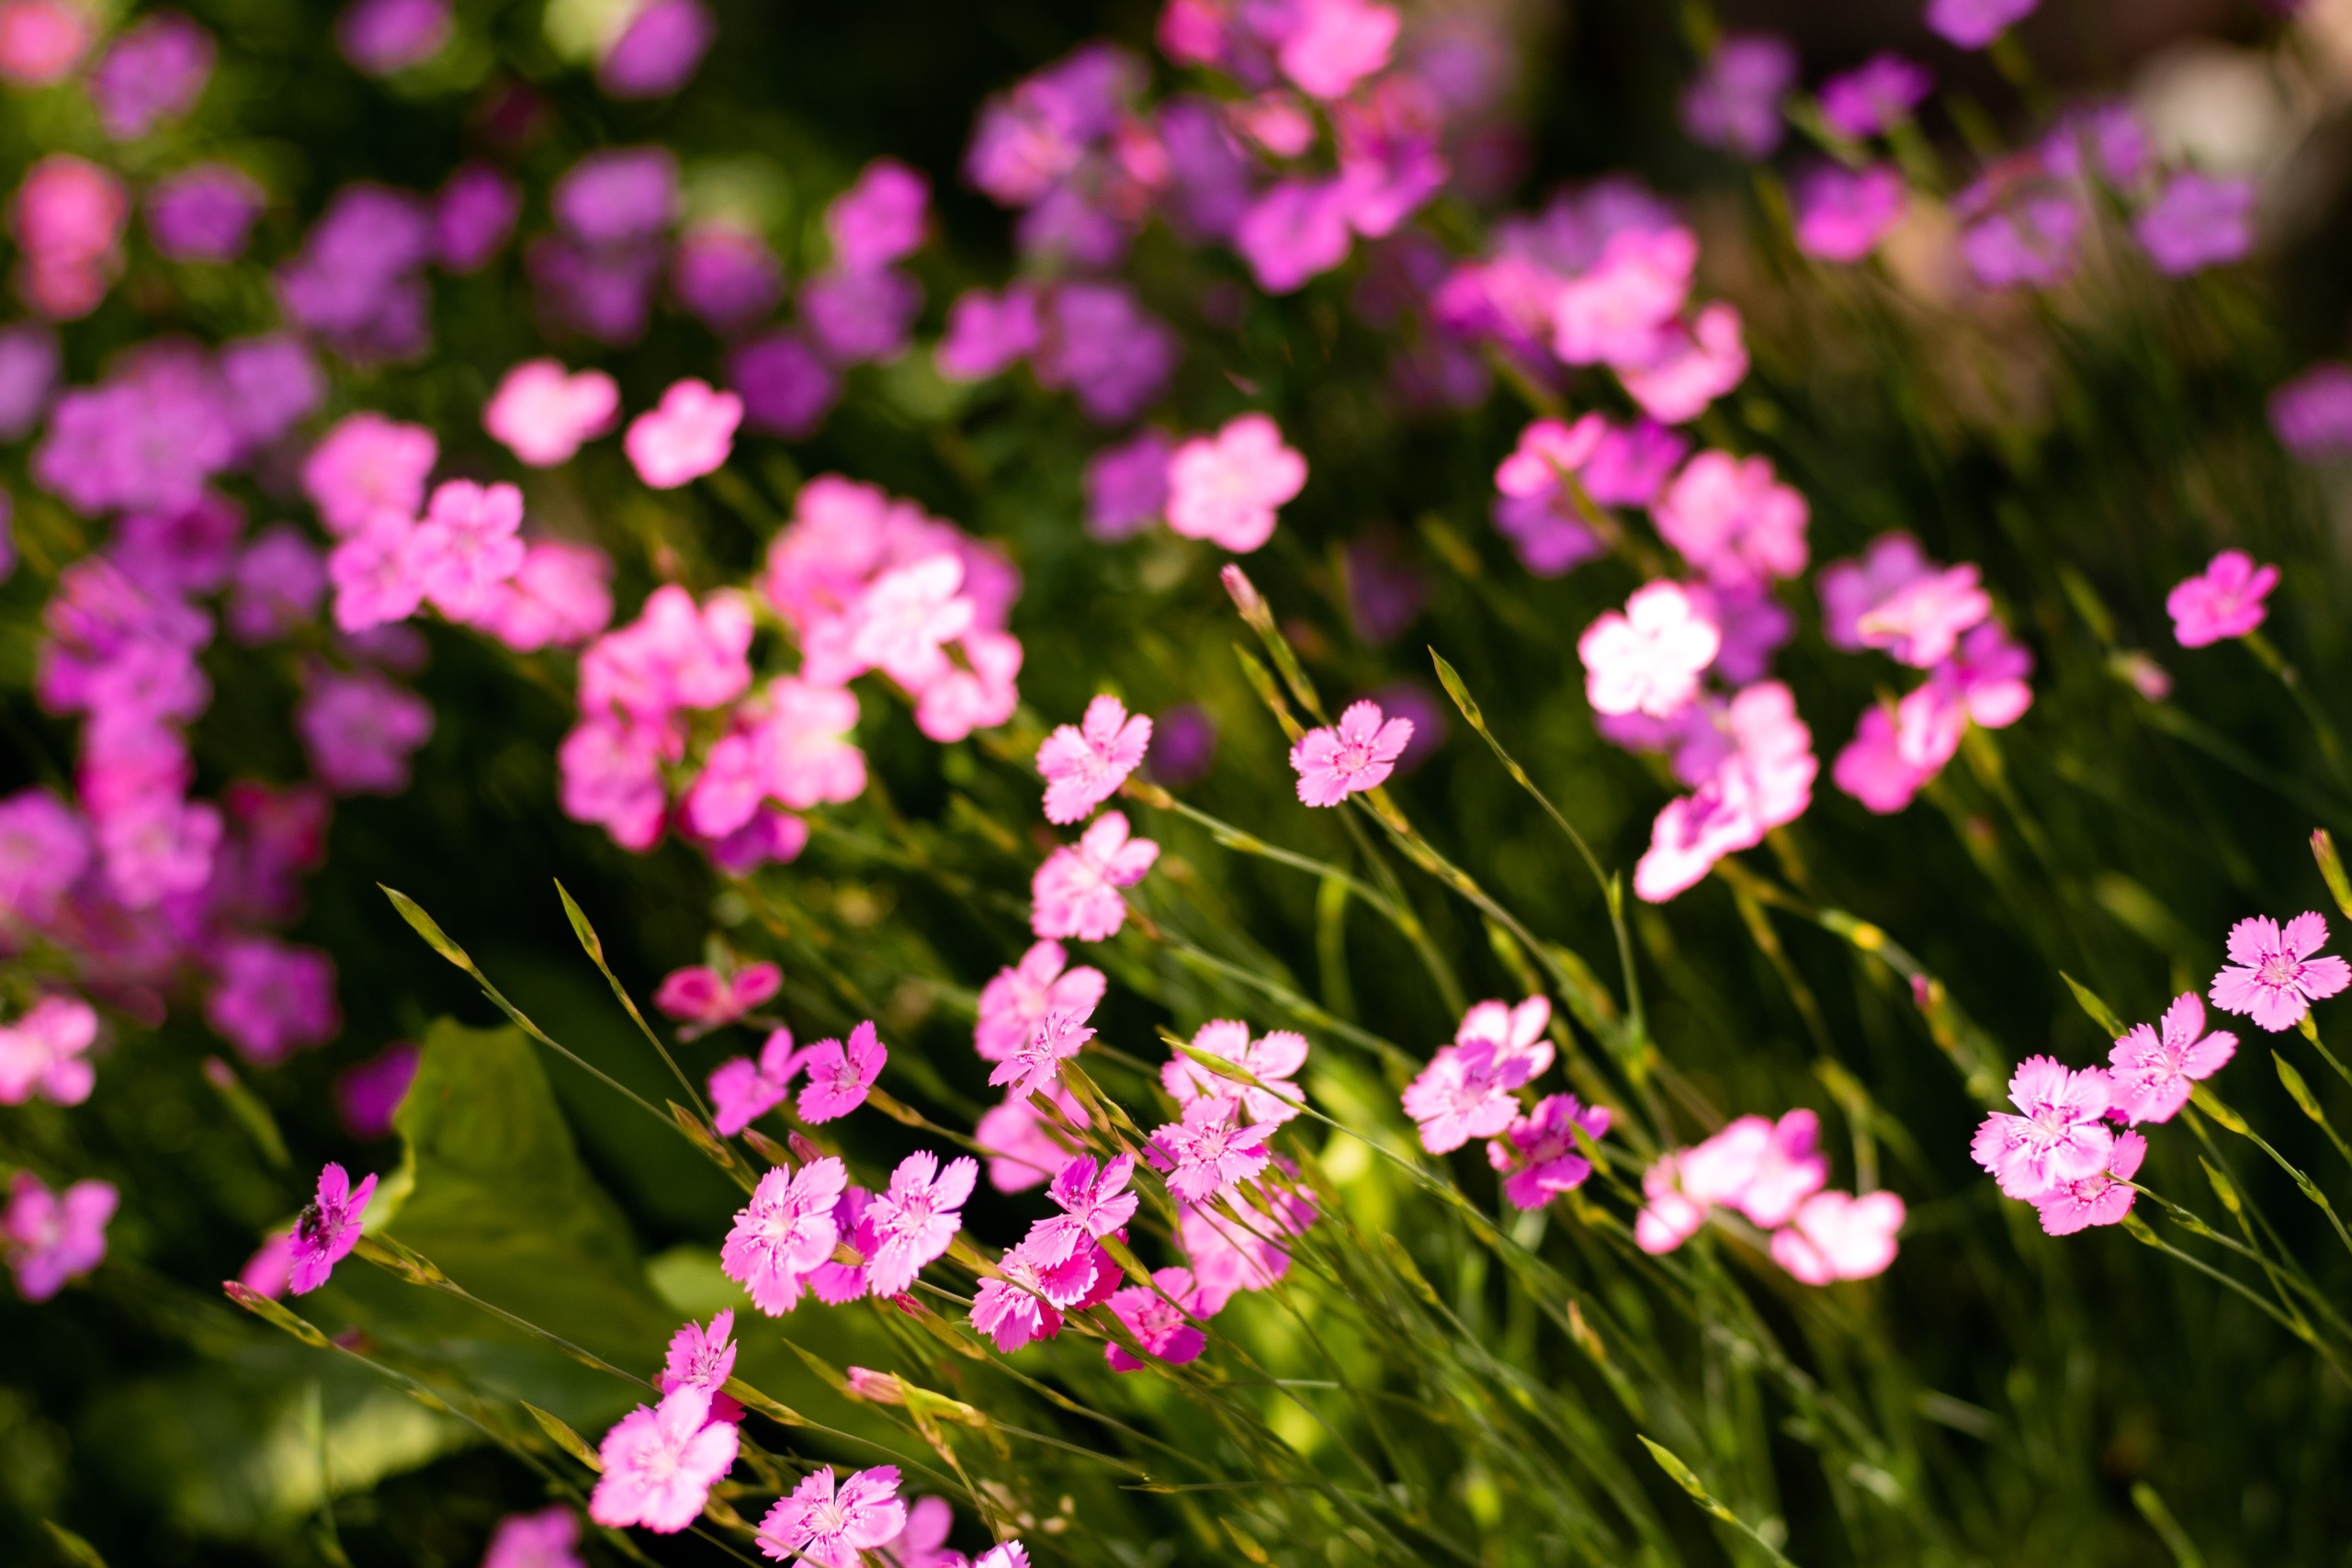 General 2560x1707 flowers nature plants colorful outdoors pink flowers